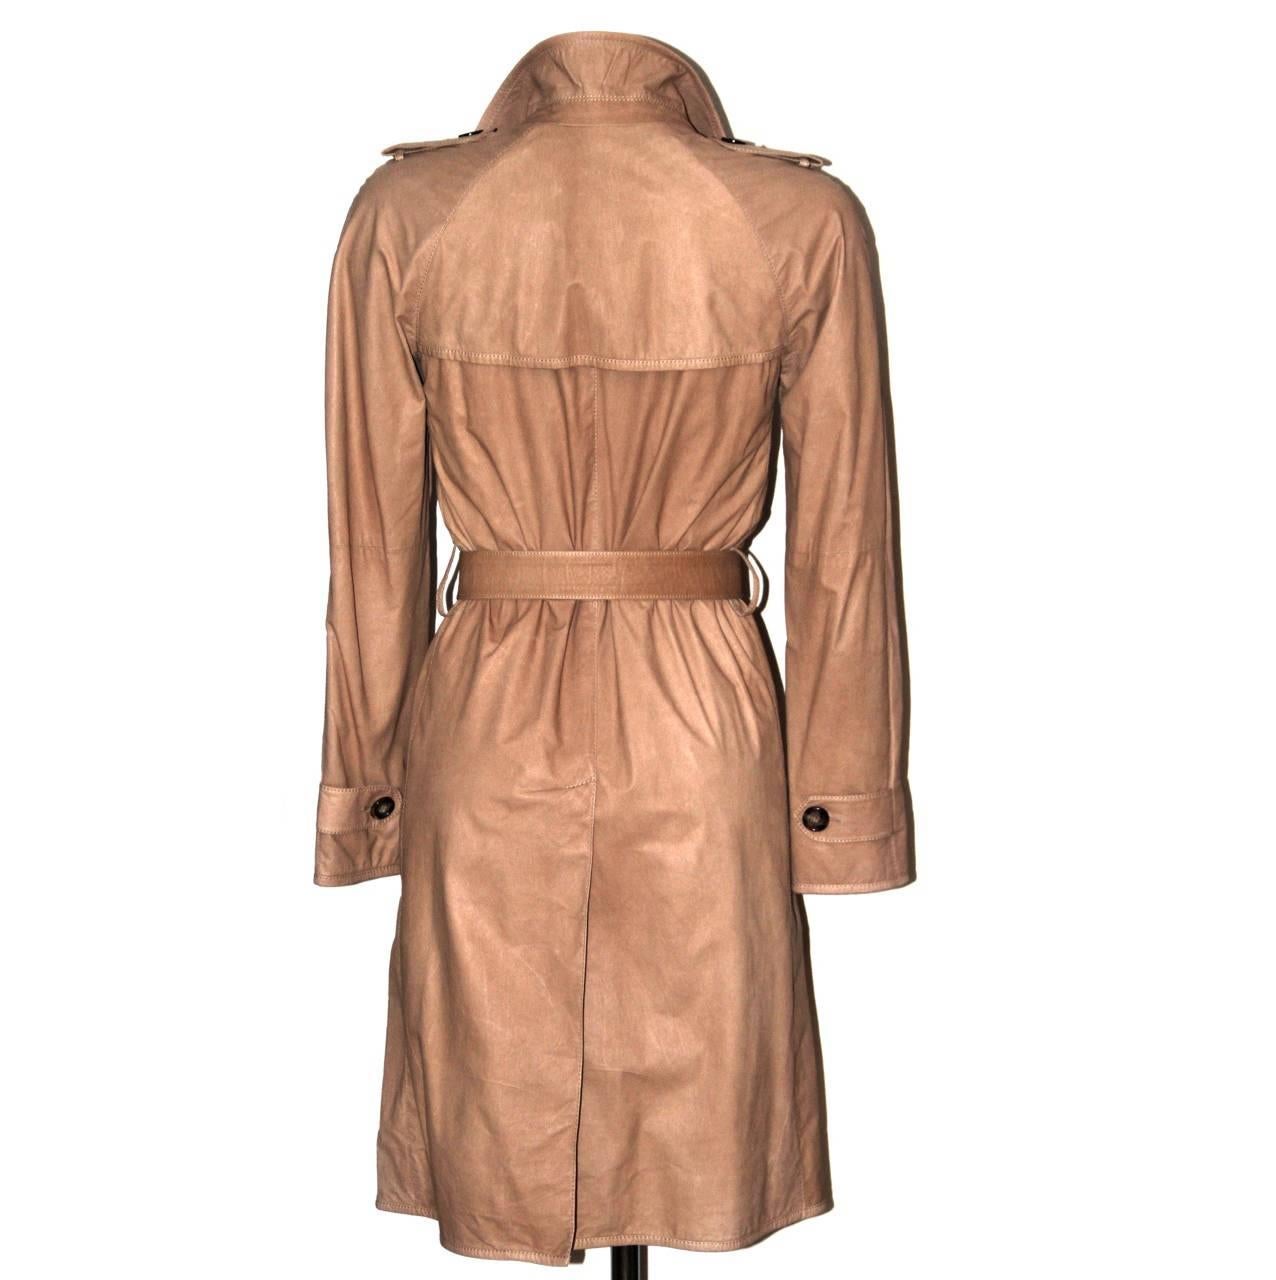 This chic Prada trench is perfect for transitioning between seasons. Crafted from soft paper thin lambskin leather, this classic double-breasted trench is detailed with shoulder epaulettes. Use the detachable belt to define your feminine